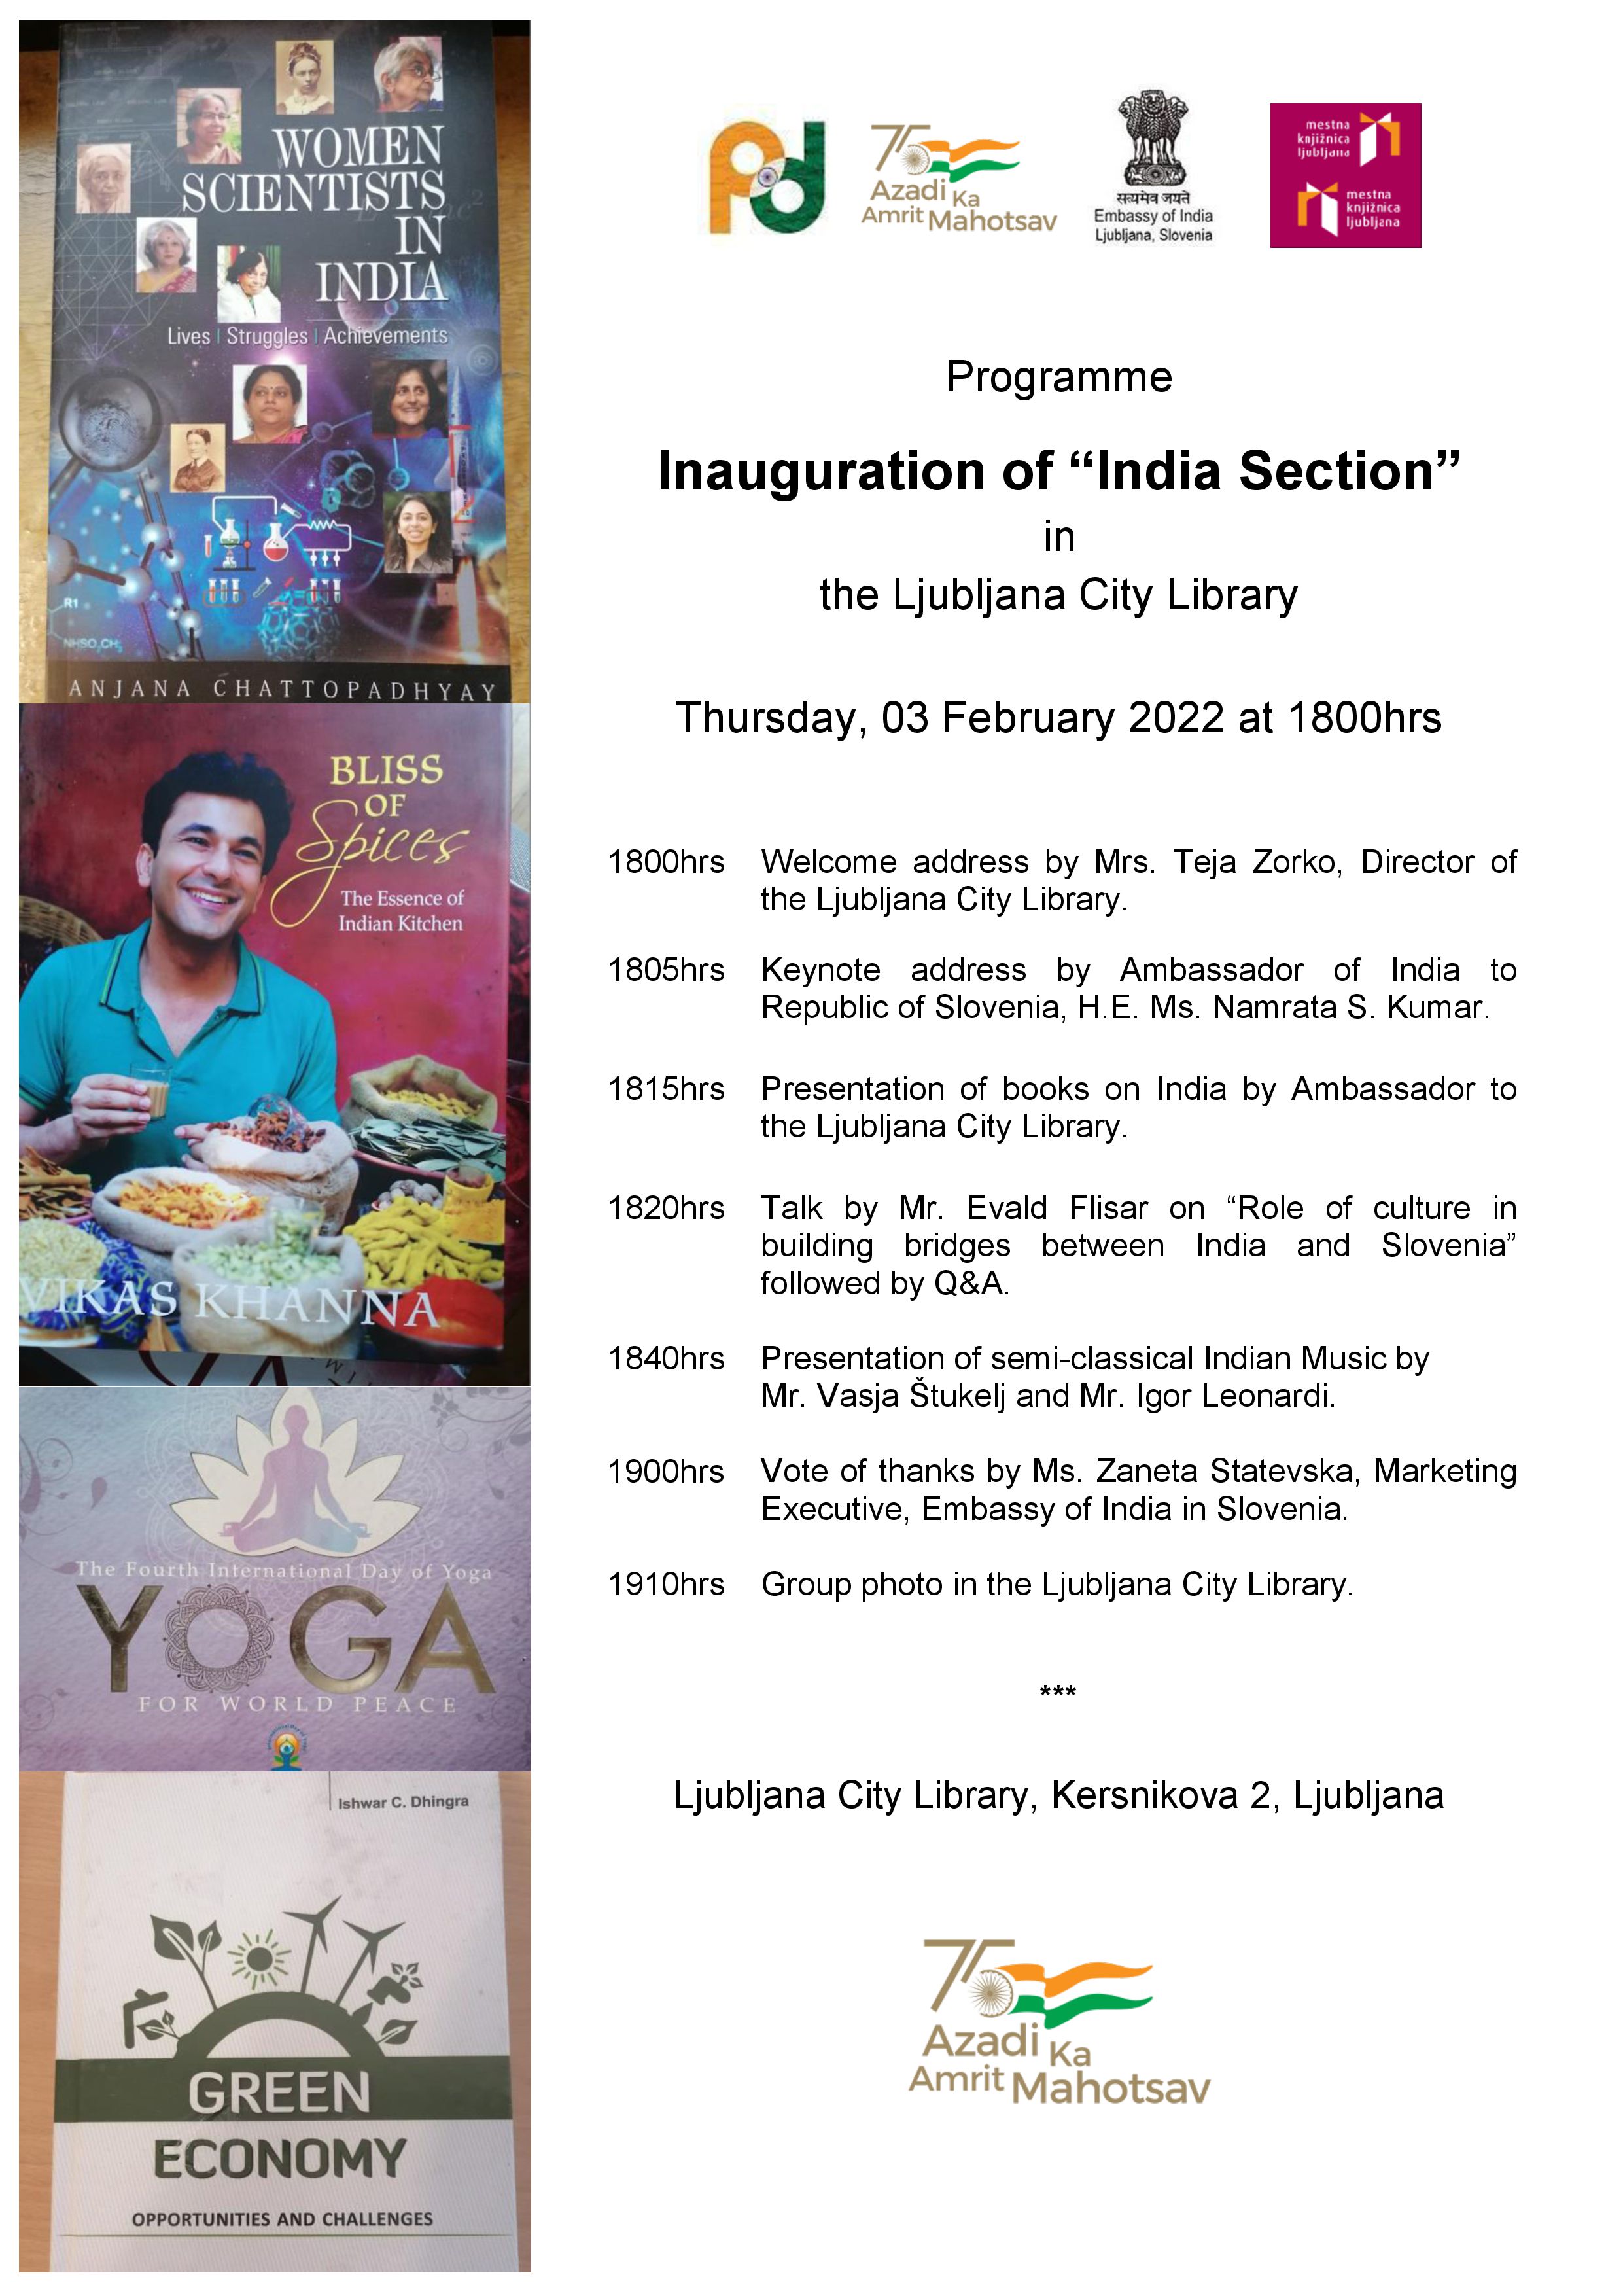 Lecture by Evald Flisar and Inauguration of India Section in Ljubljana City Library